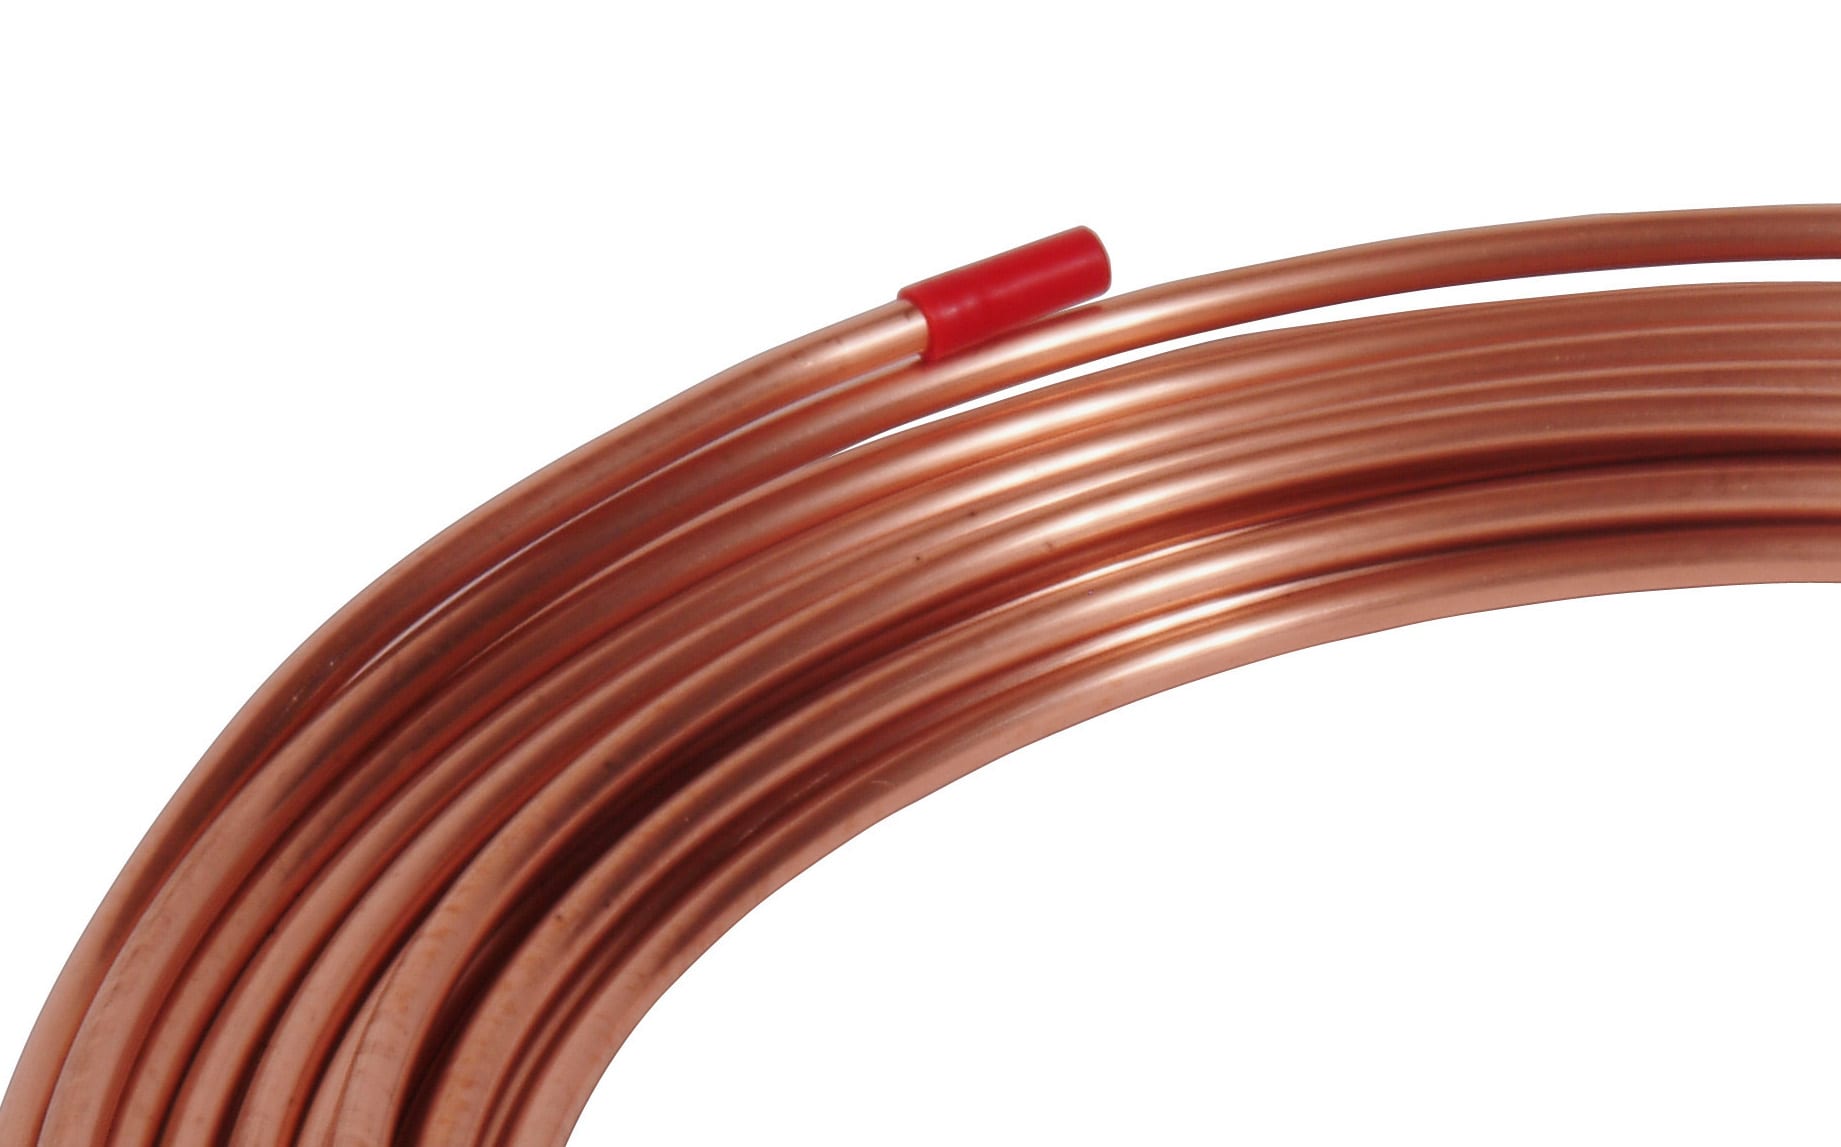 3 Details about   Lot of Mueller 1/4" x 50' Dehydrated Copper Refrigeration Tubing D-4050 